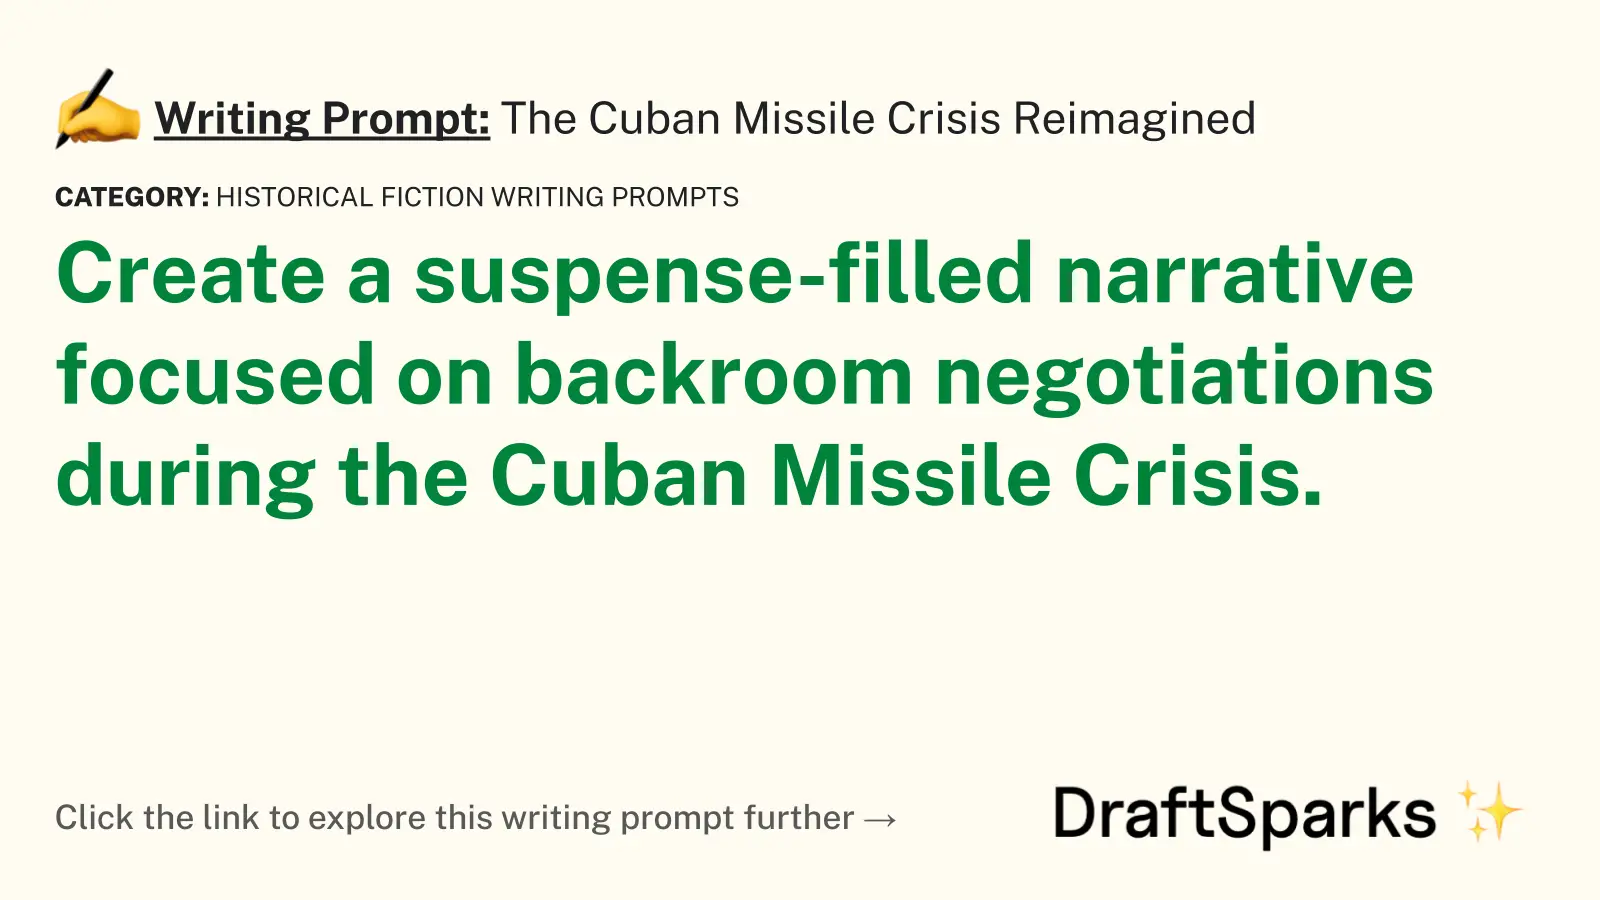 The Cuban Missile Crisis Reimagined